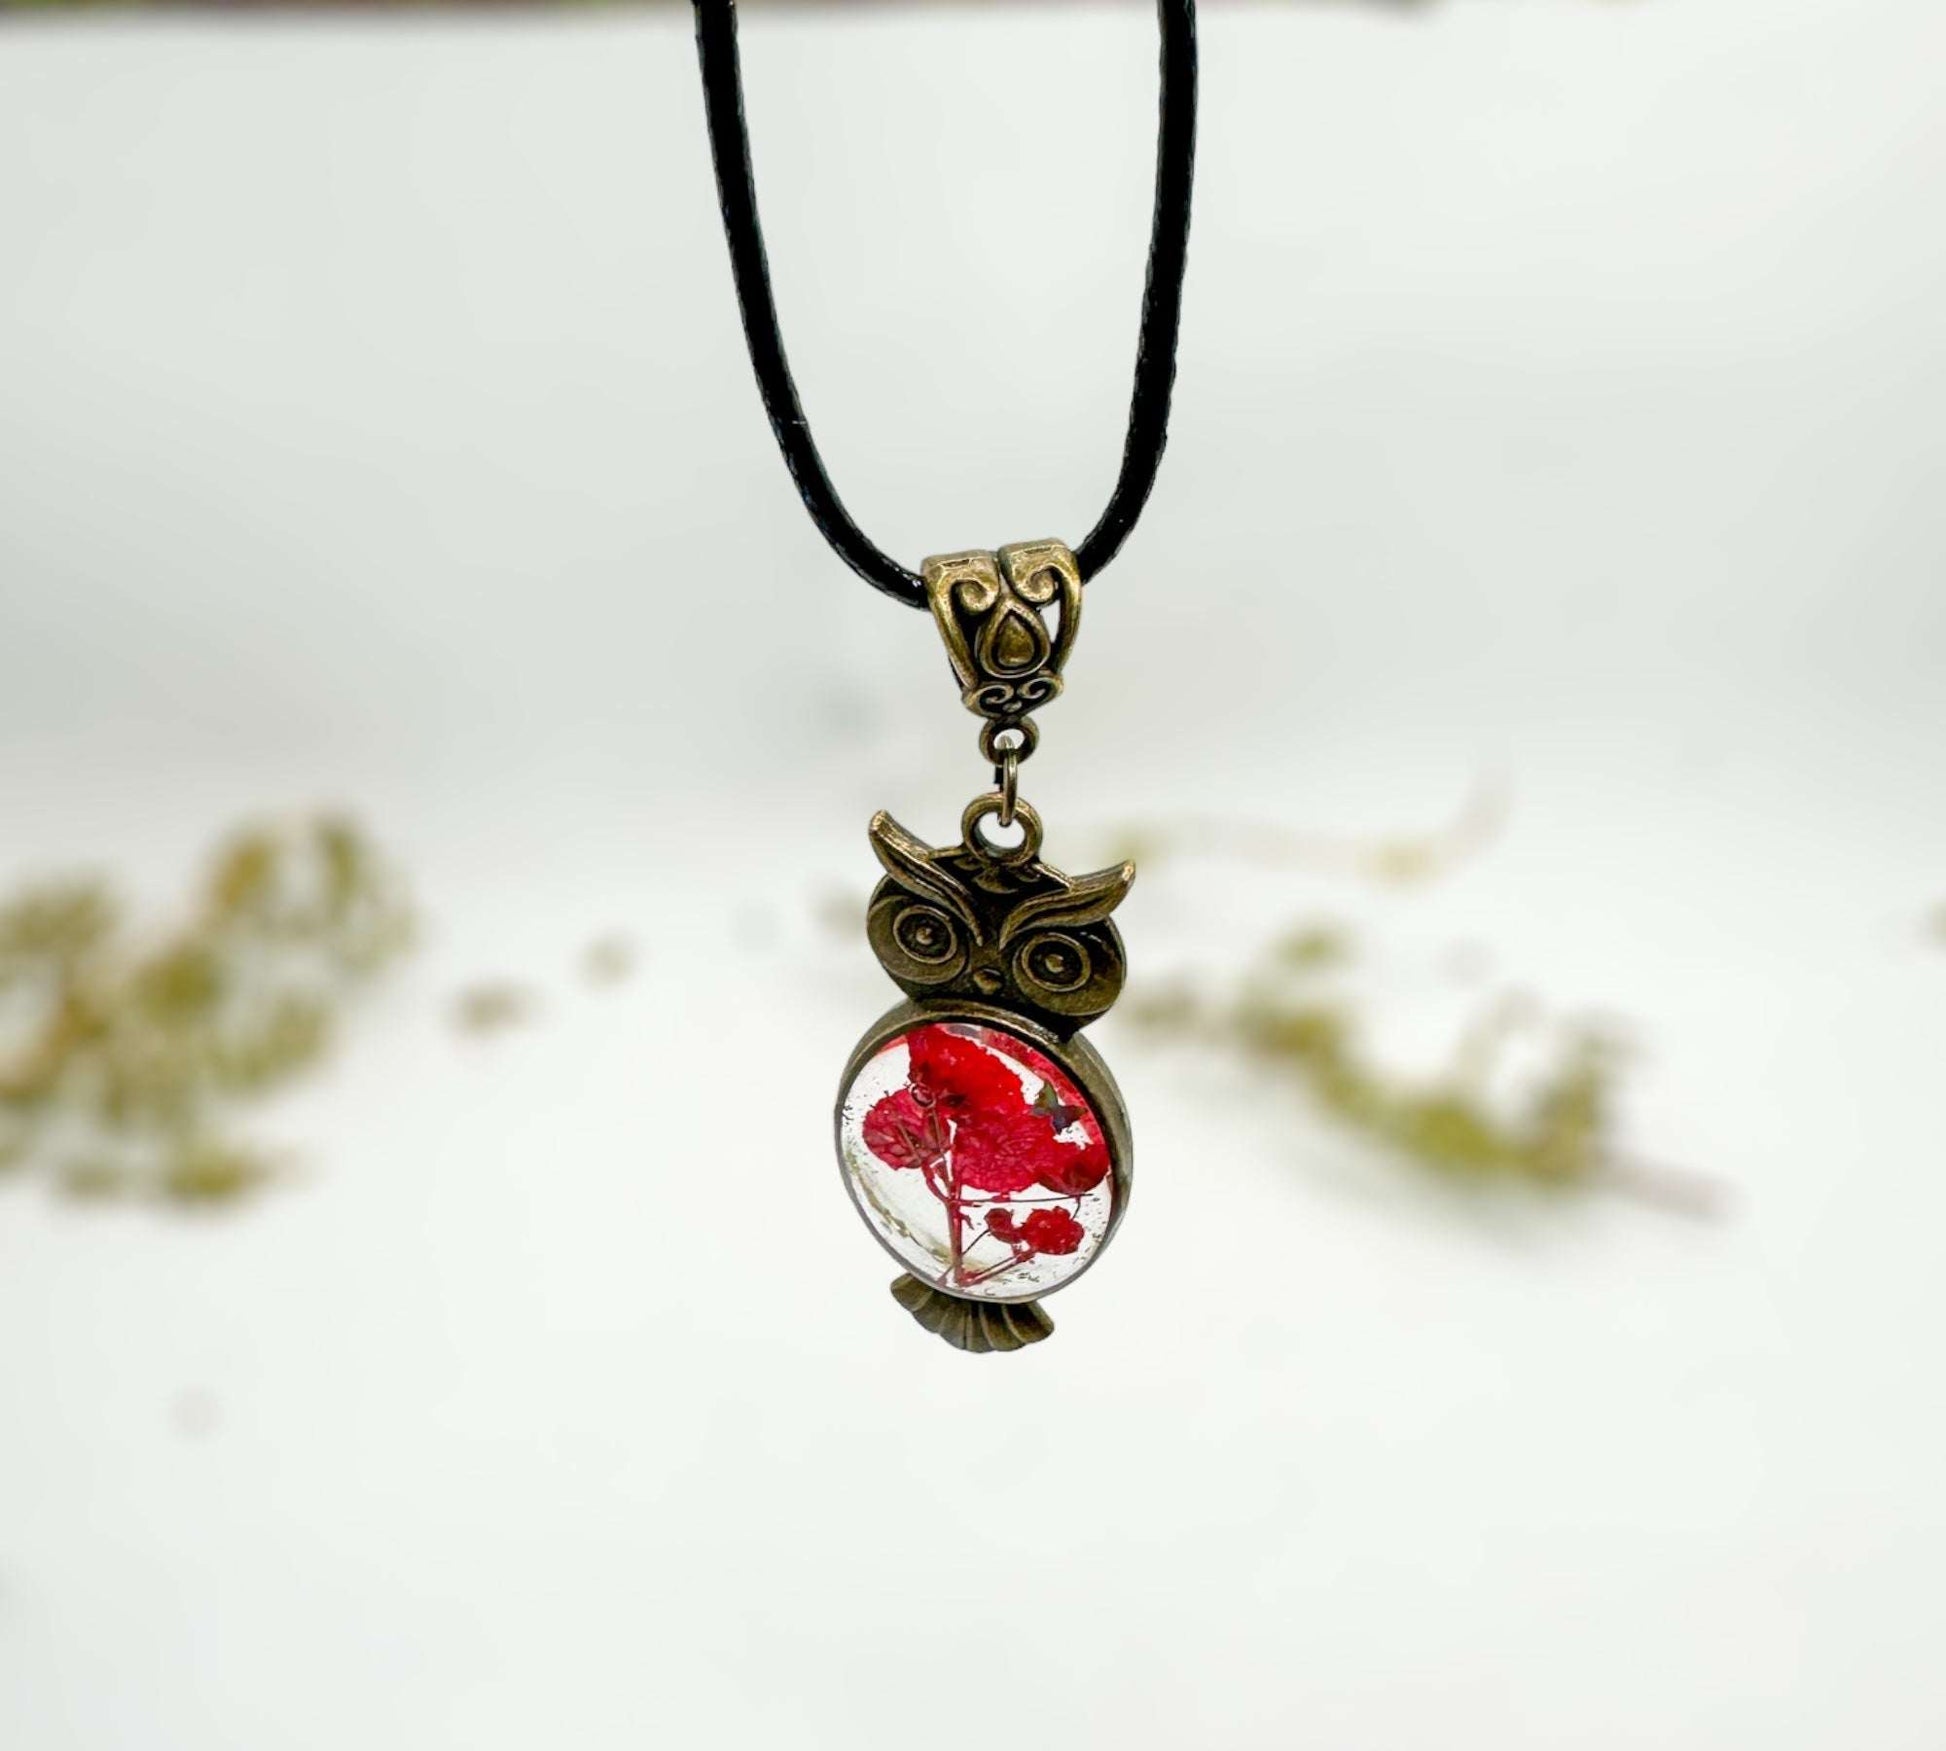 Owl Pendant - Red Blooms and Butterflies - Pressed Flower Necklace